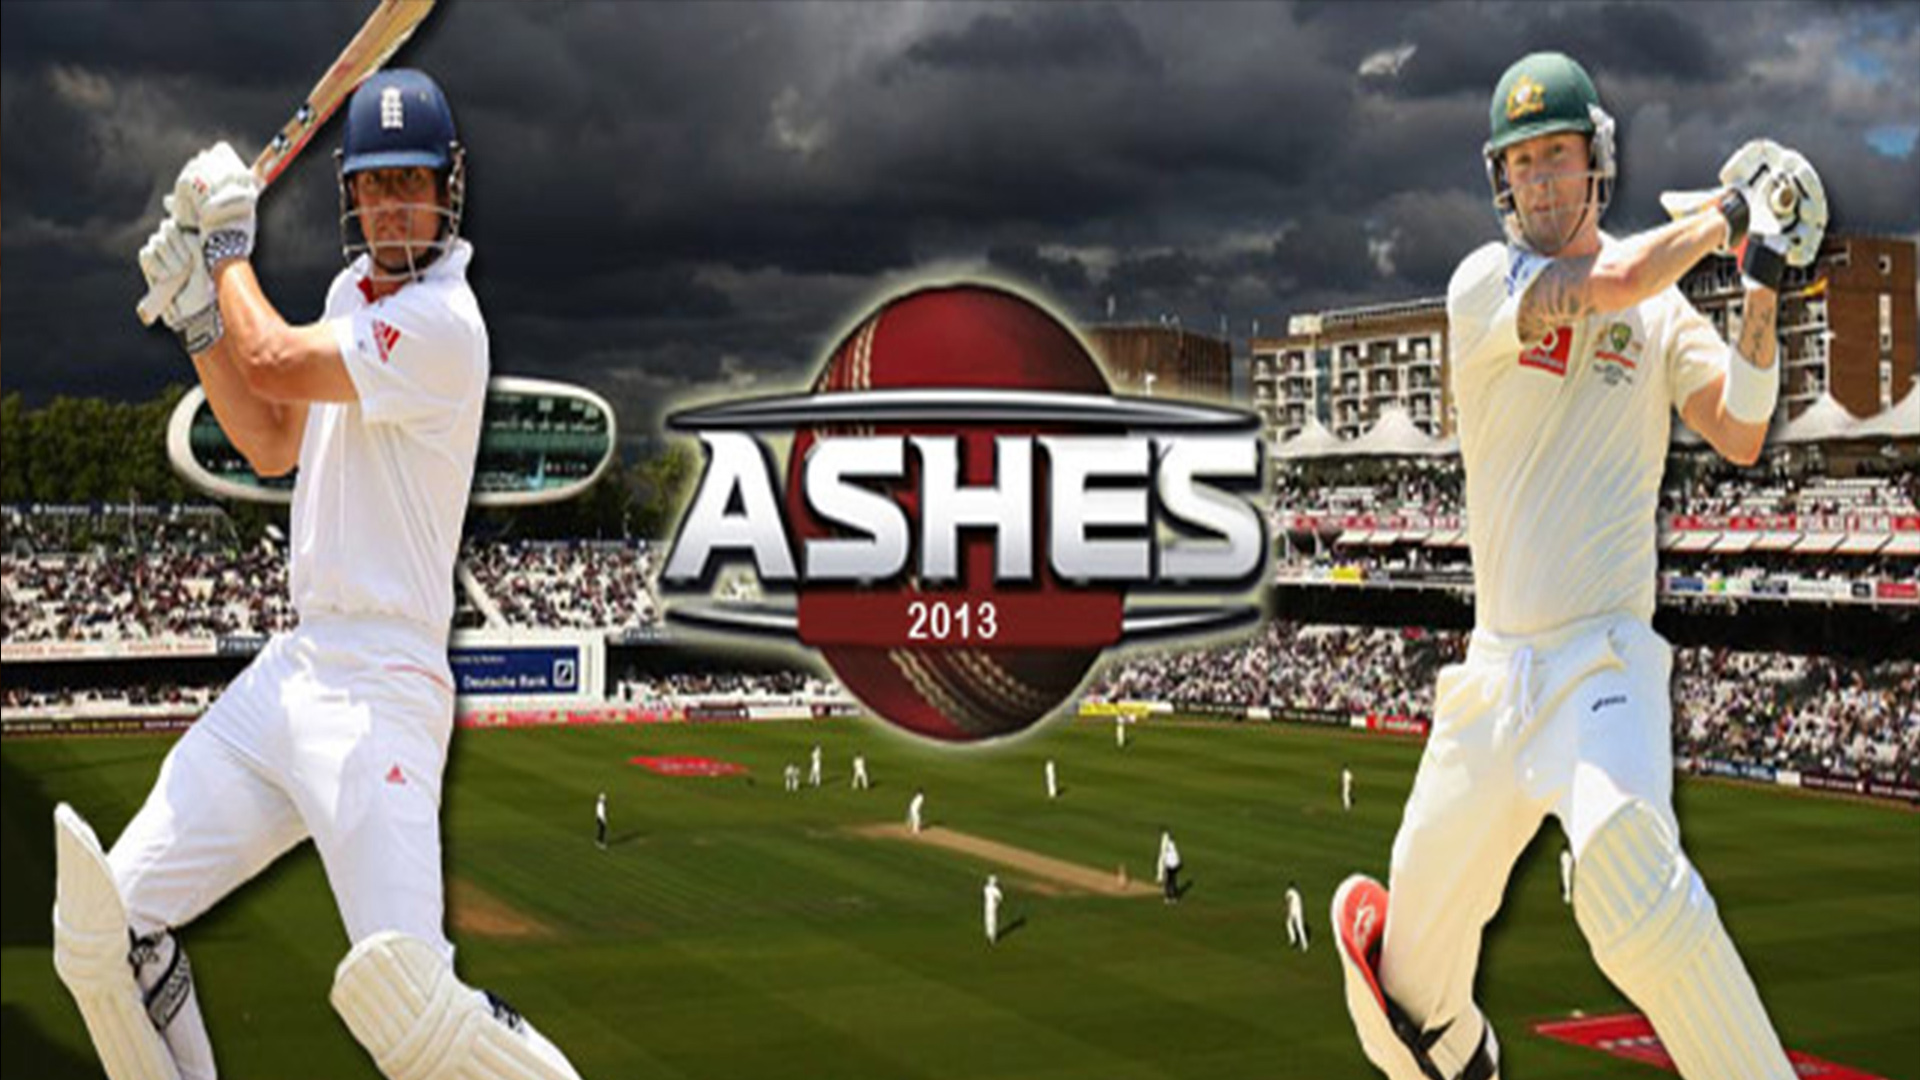 Ashes Cricket 2013 HD Wallpapers and Backgrounds